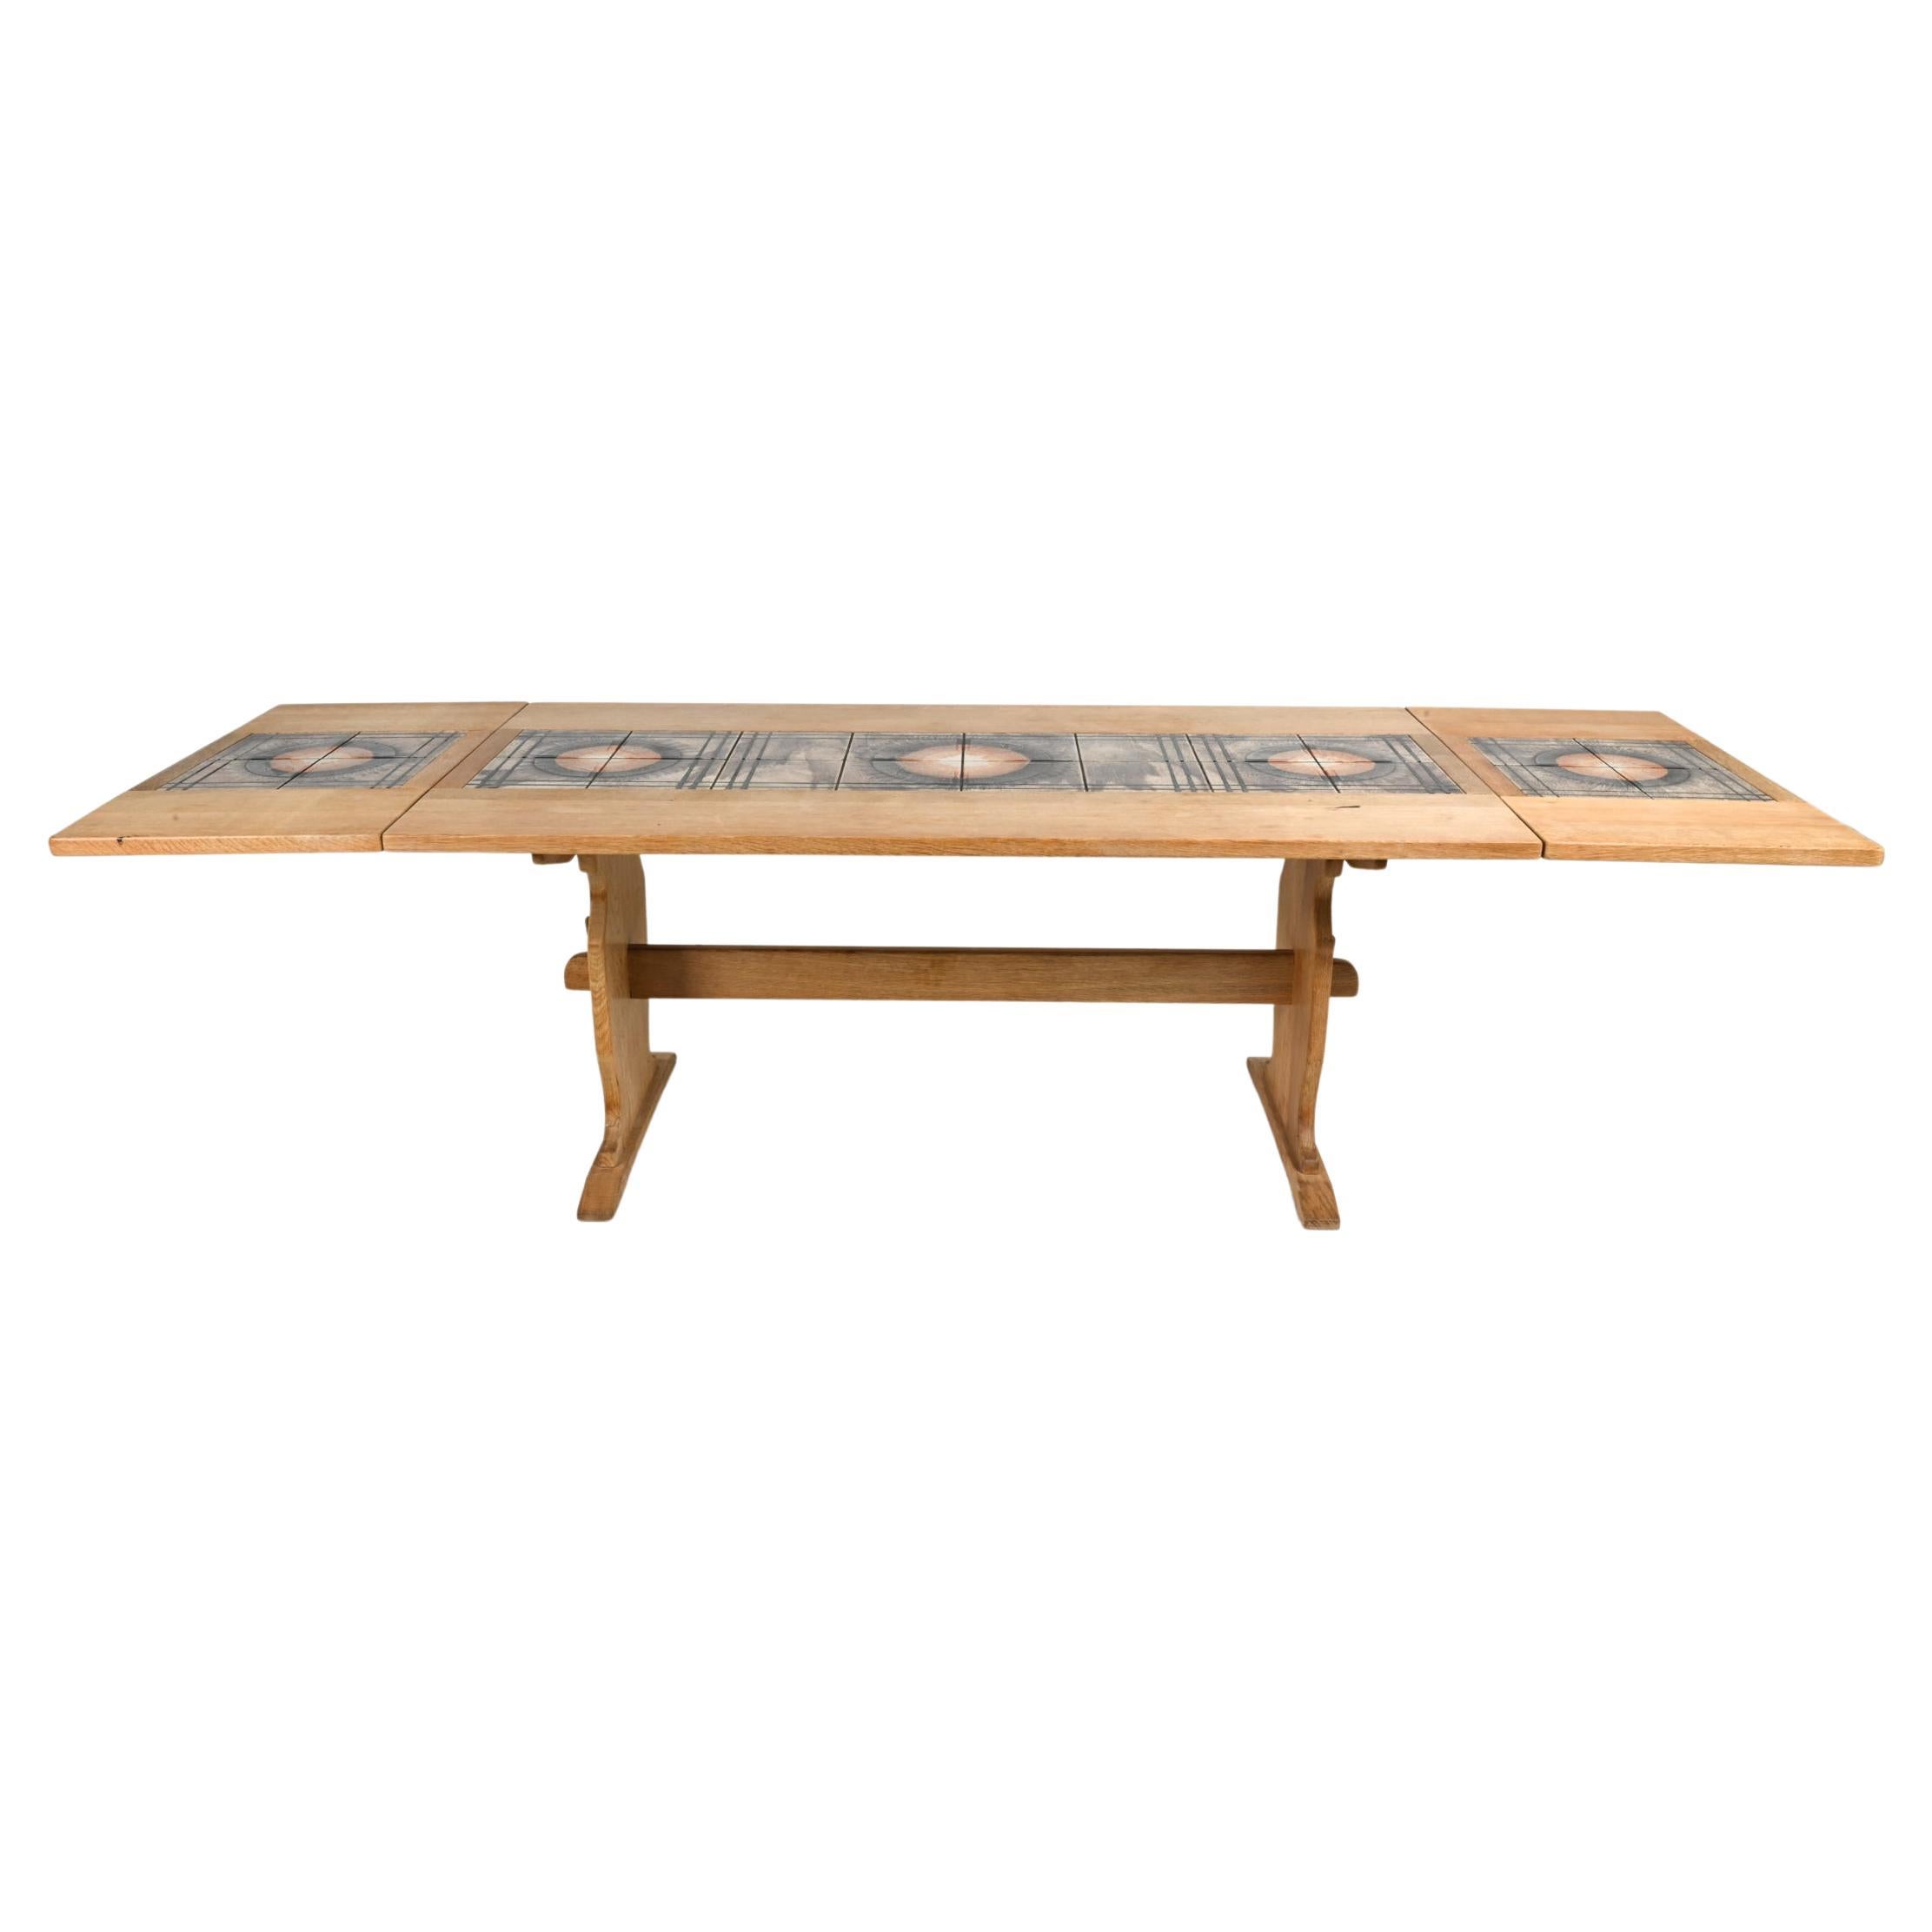 Danish Ox Art Oak & Ceramic Tile Mosaic-Top Dining Table With Leaves, c. 1970's